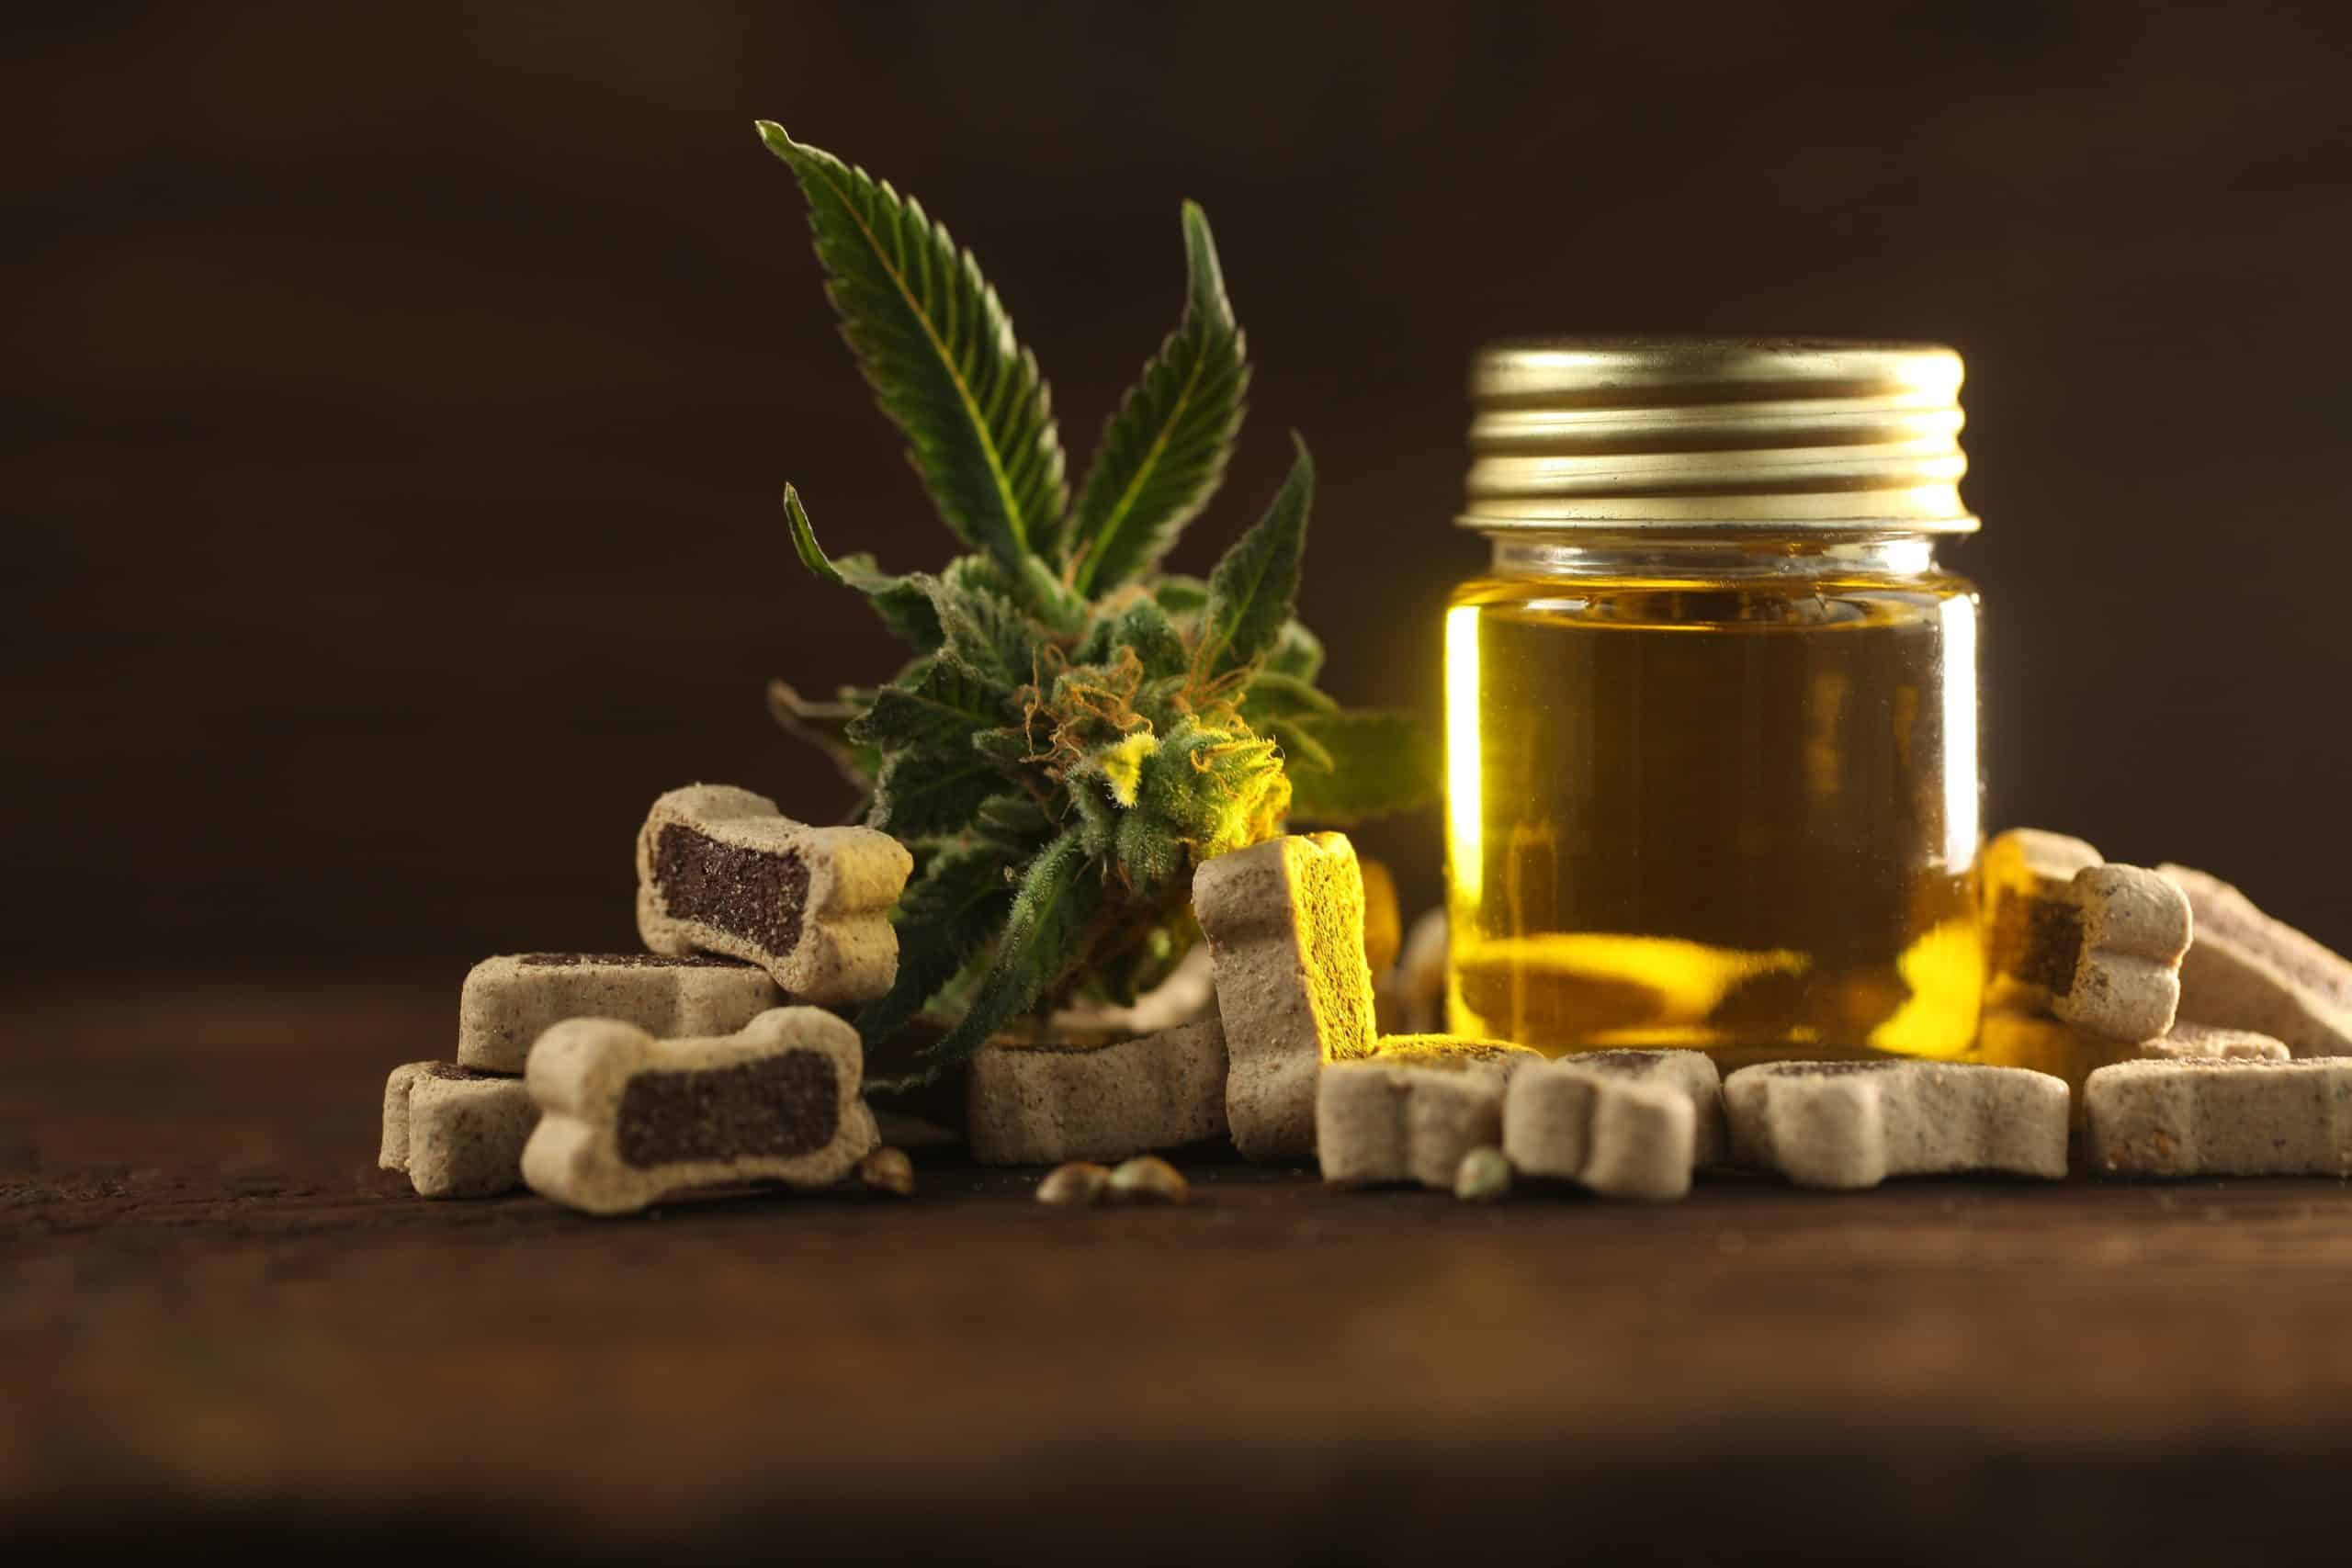 Photo illustration of CBD dog treats. CBD benefits for dogs include reducing anxiety and back pain, promoting gastrointestinal health, reducing cancer risk, and managing seizures.